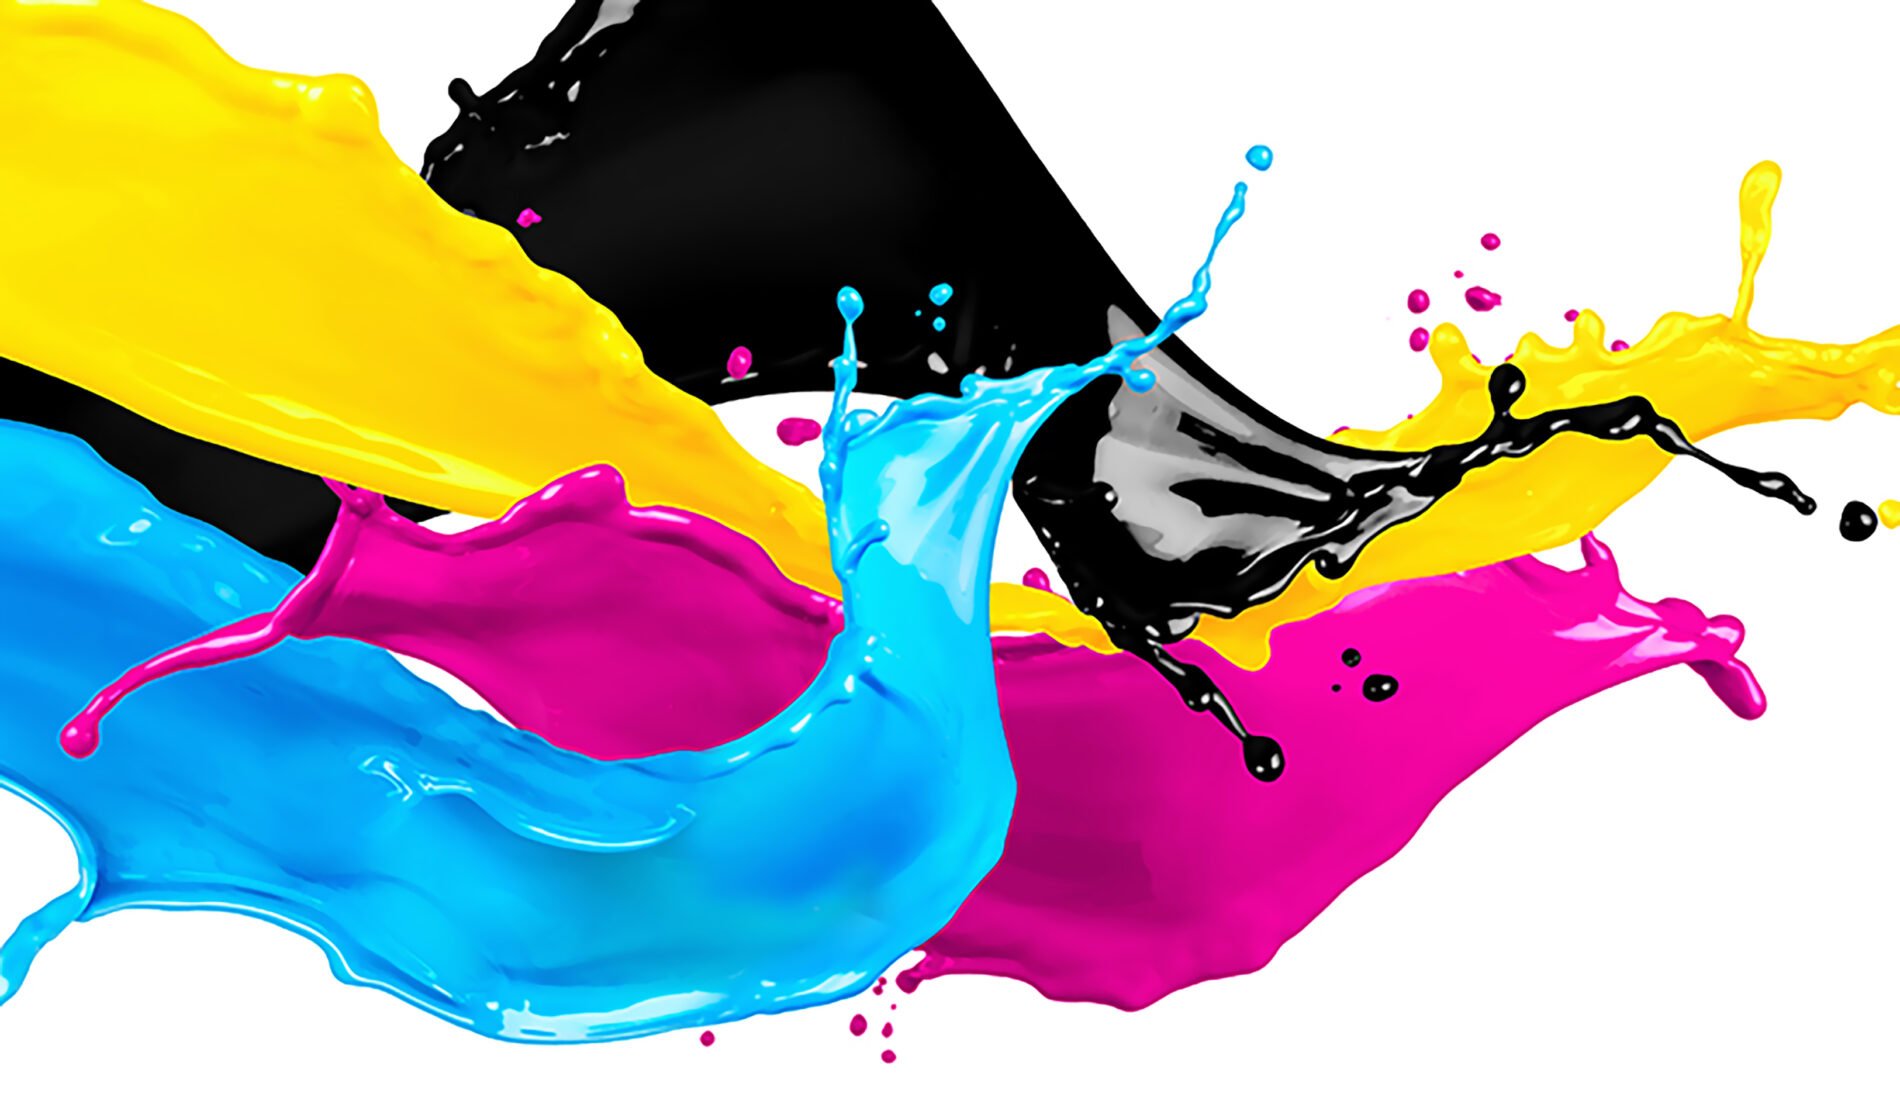 blue, pink, yellow and black paint splashing together